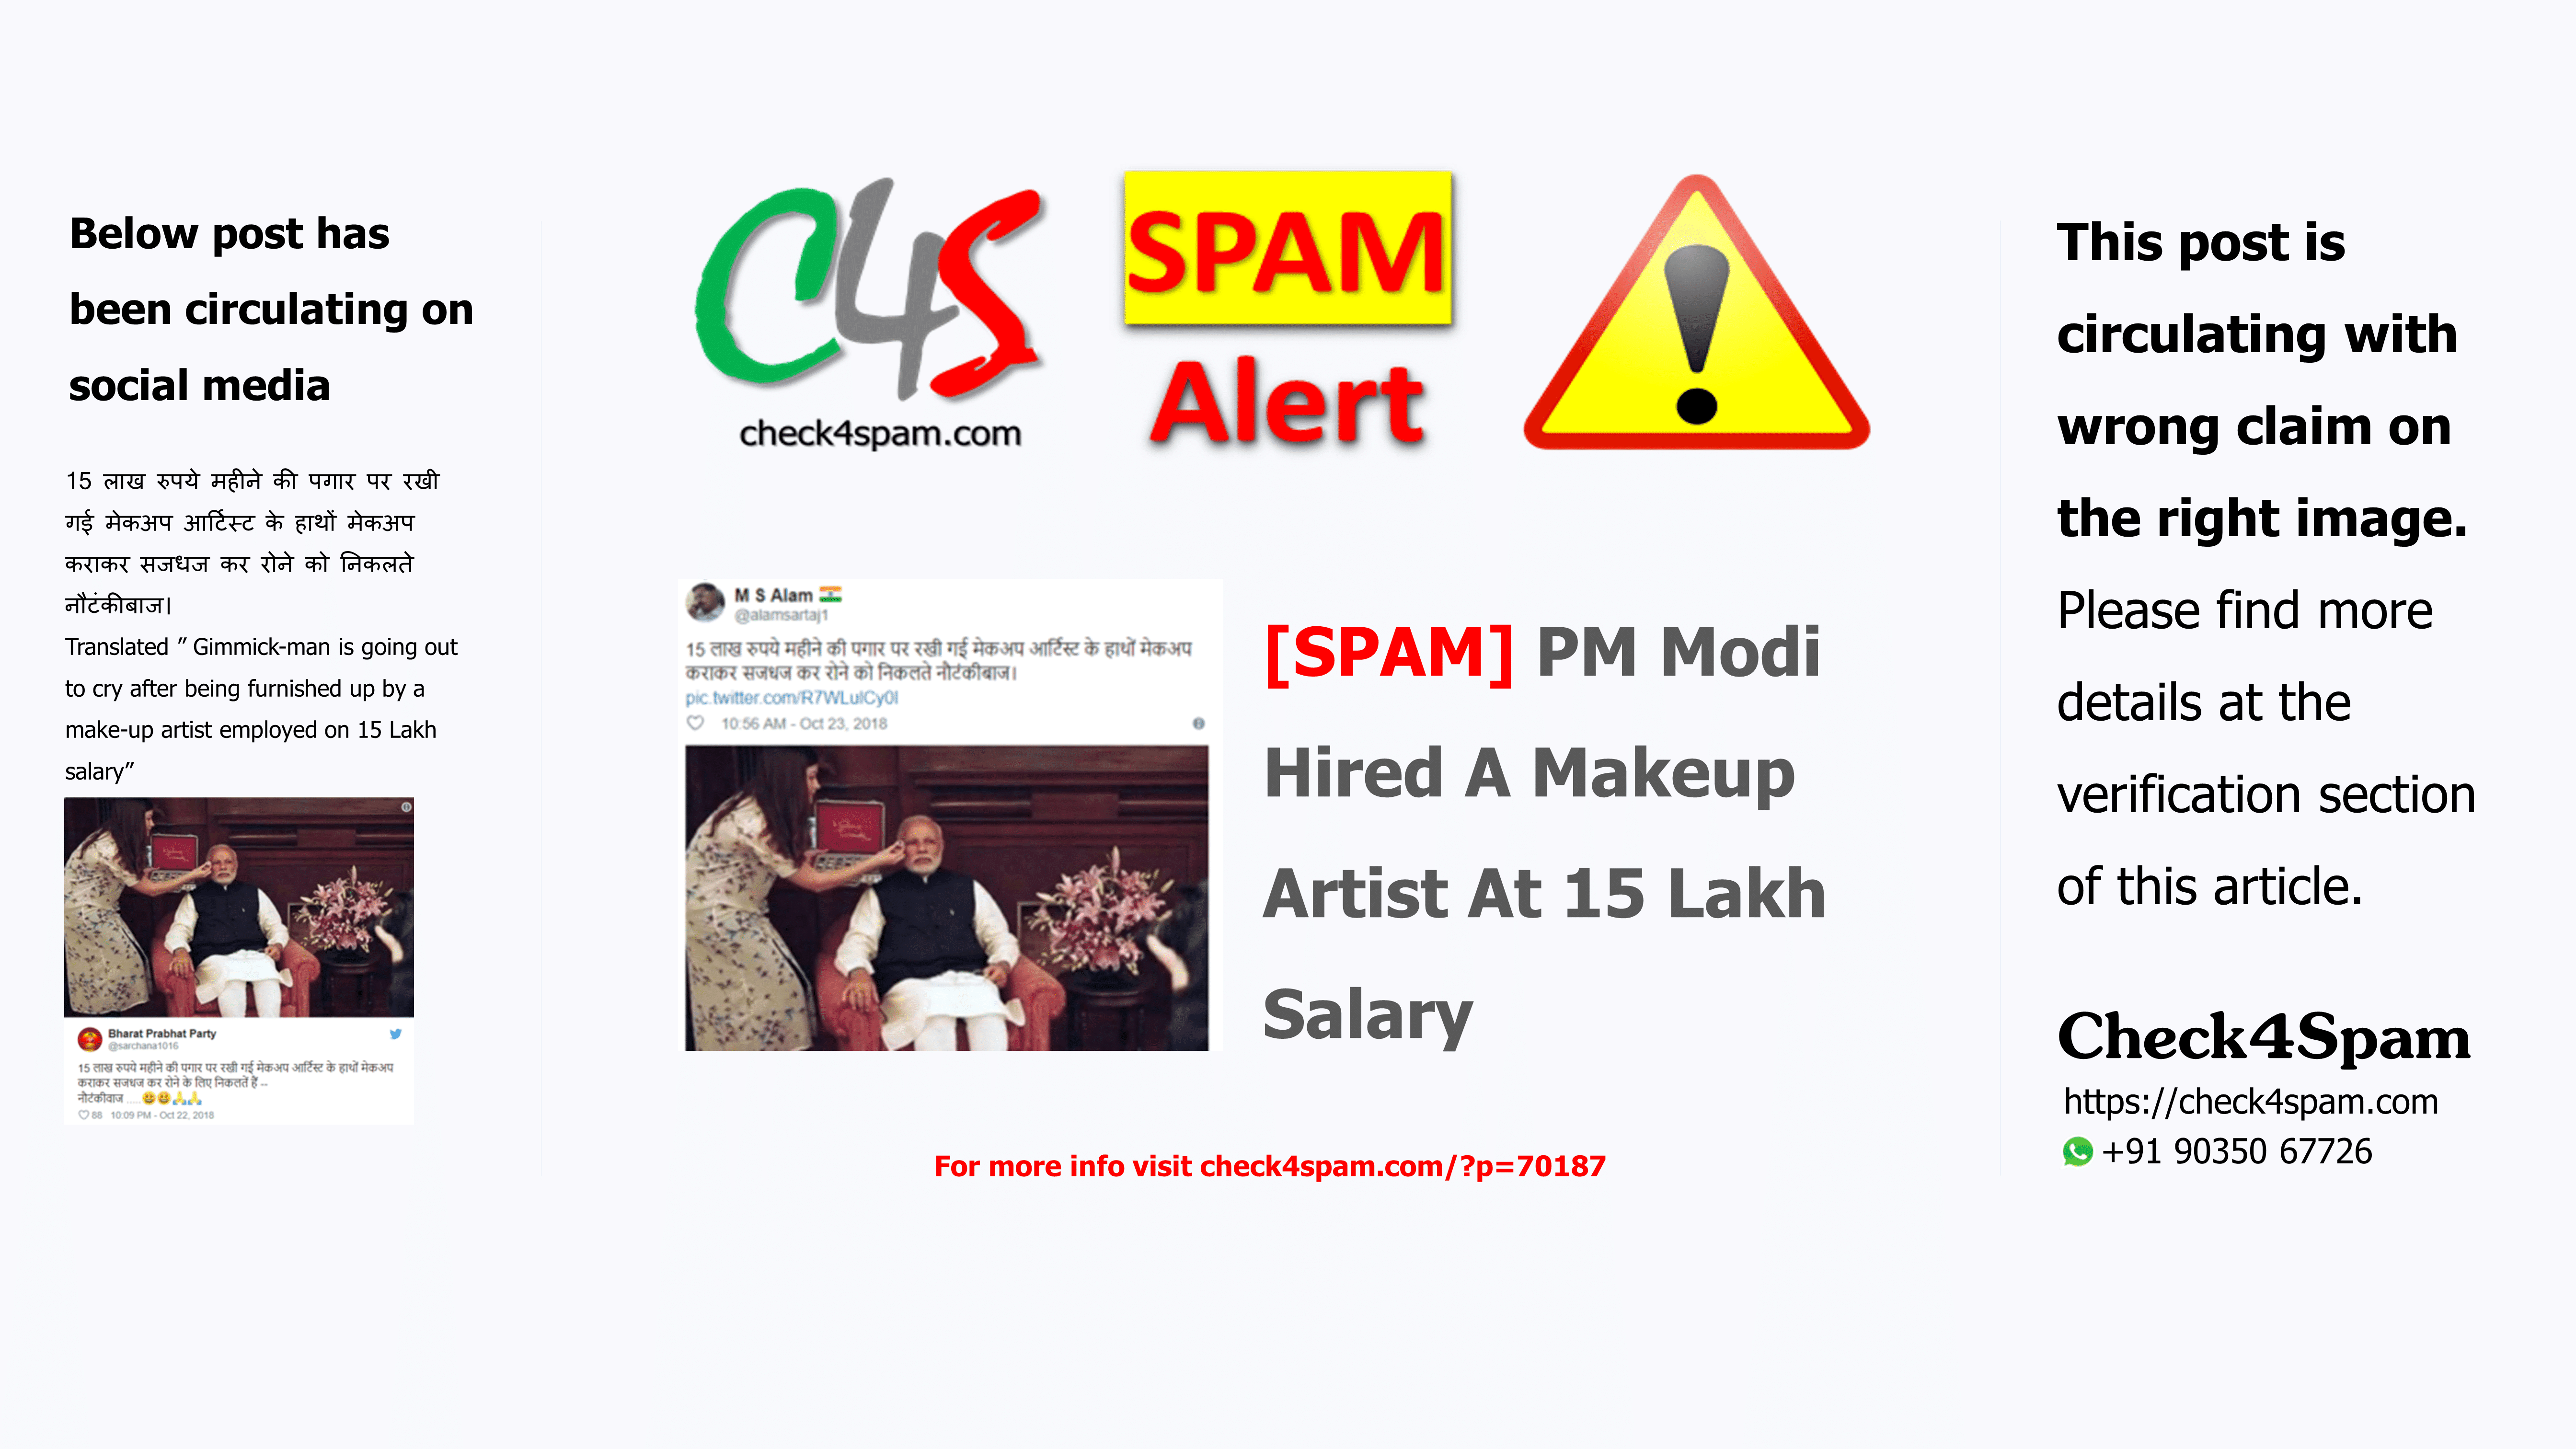 [SPAM] PM Modi Hired A Makeup Artist At 15 Lakh Salary